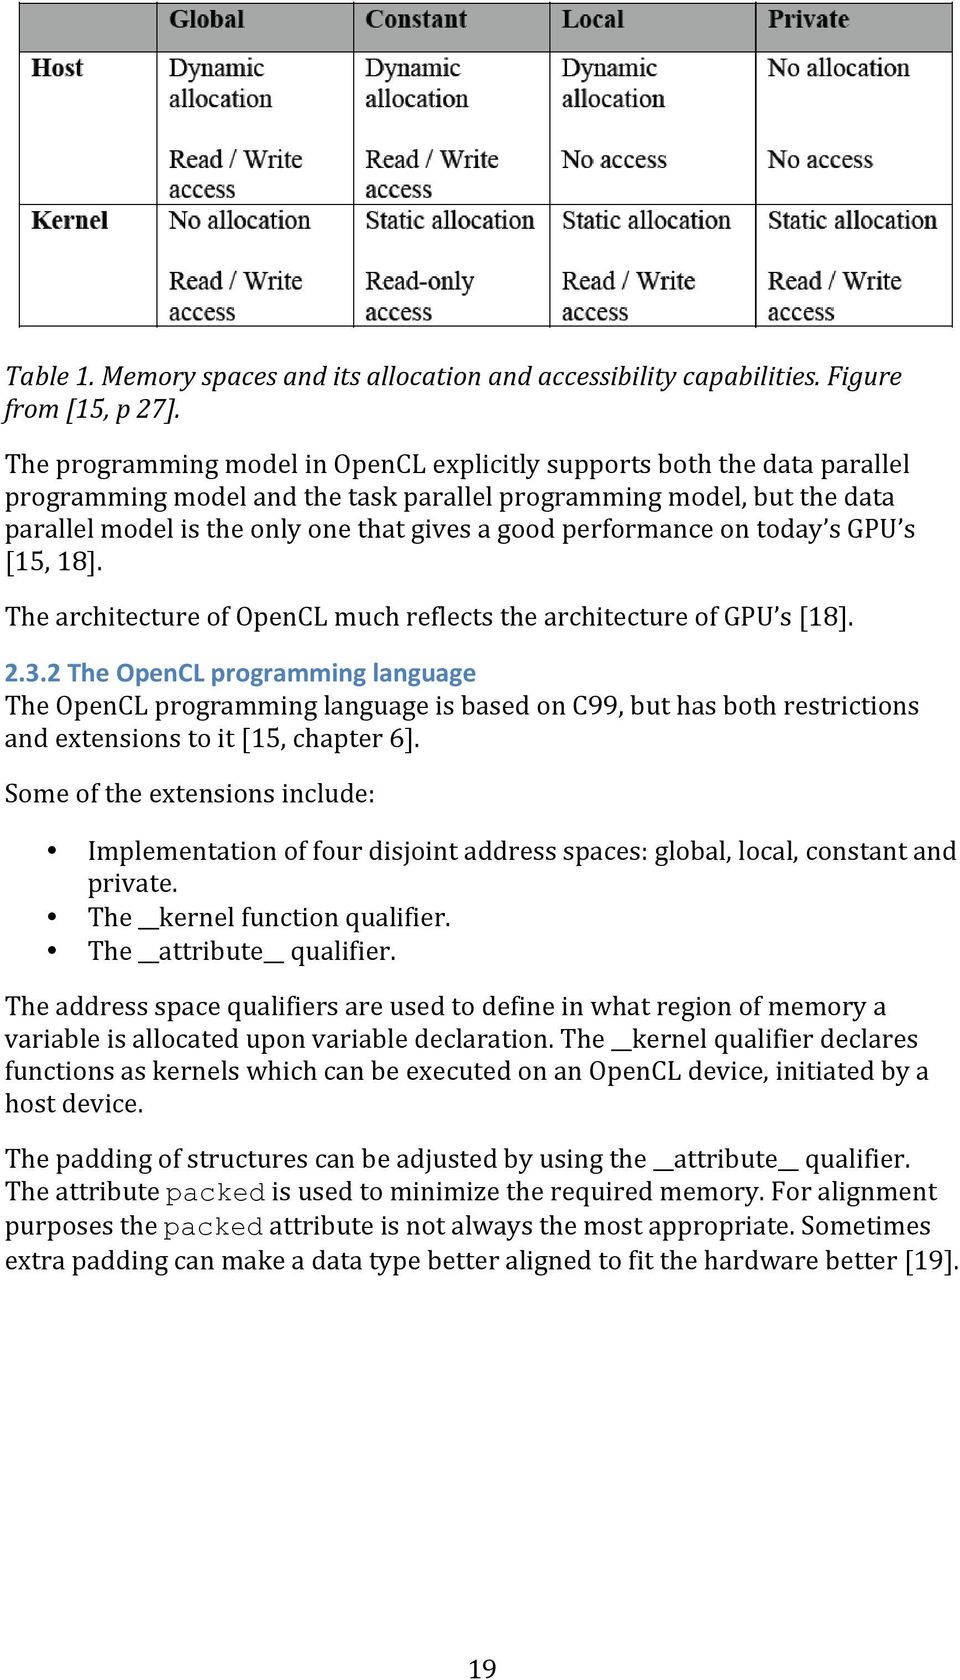 [18].! 2.3.2)The)OpenCL)programming)language) The!OpenCL!programming!language!is!based!on!C99,!but!has!both!restrictions! and!extensions!to!it![15,!chapter!6].! Some!of!the!extensions!include:!